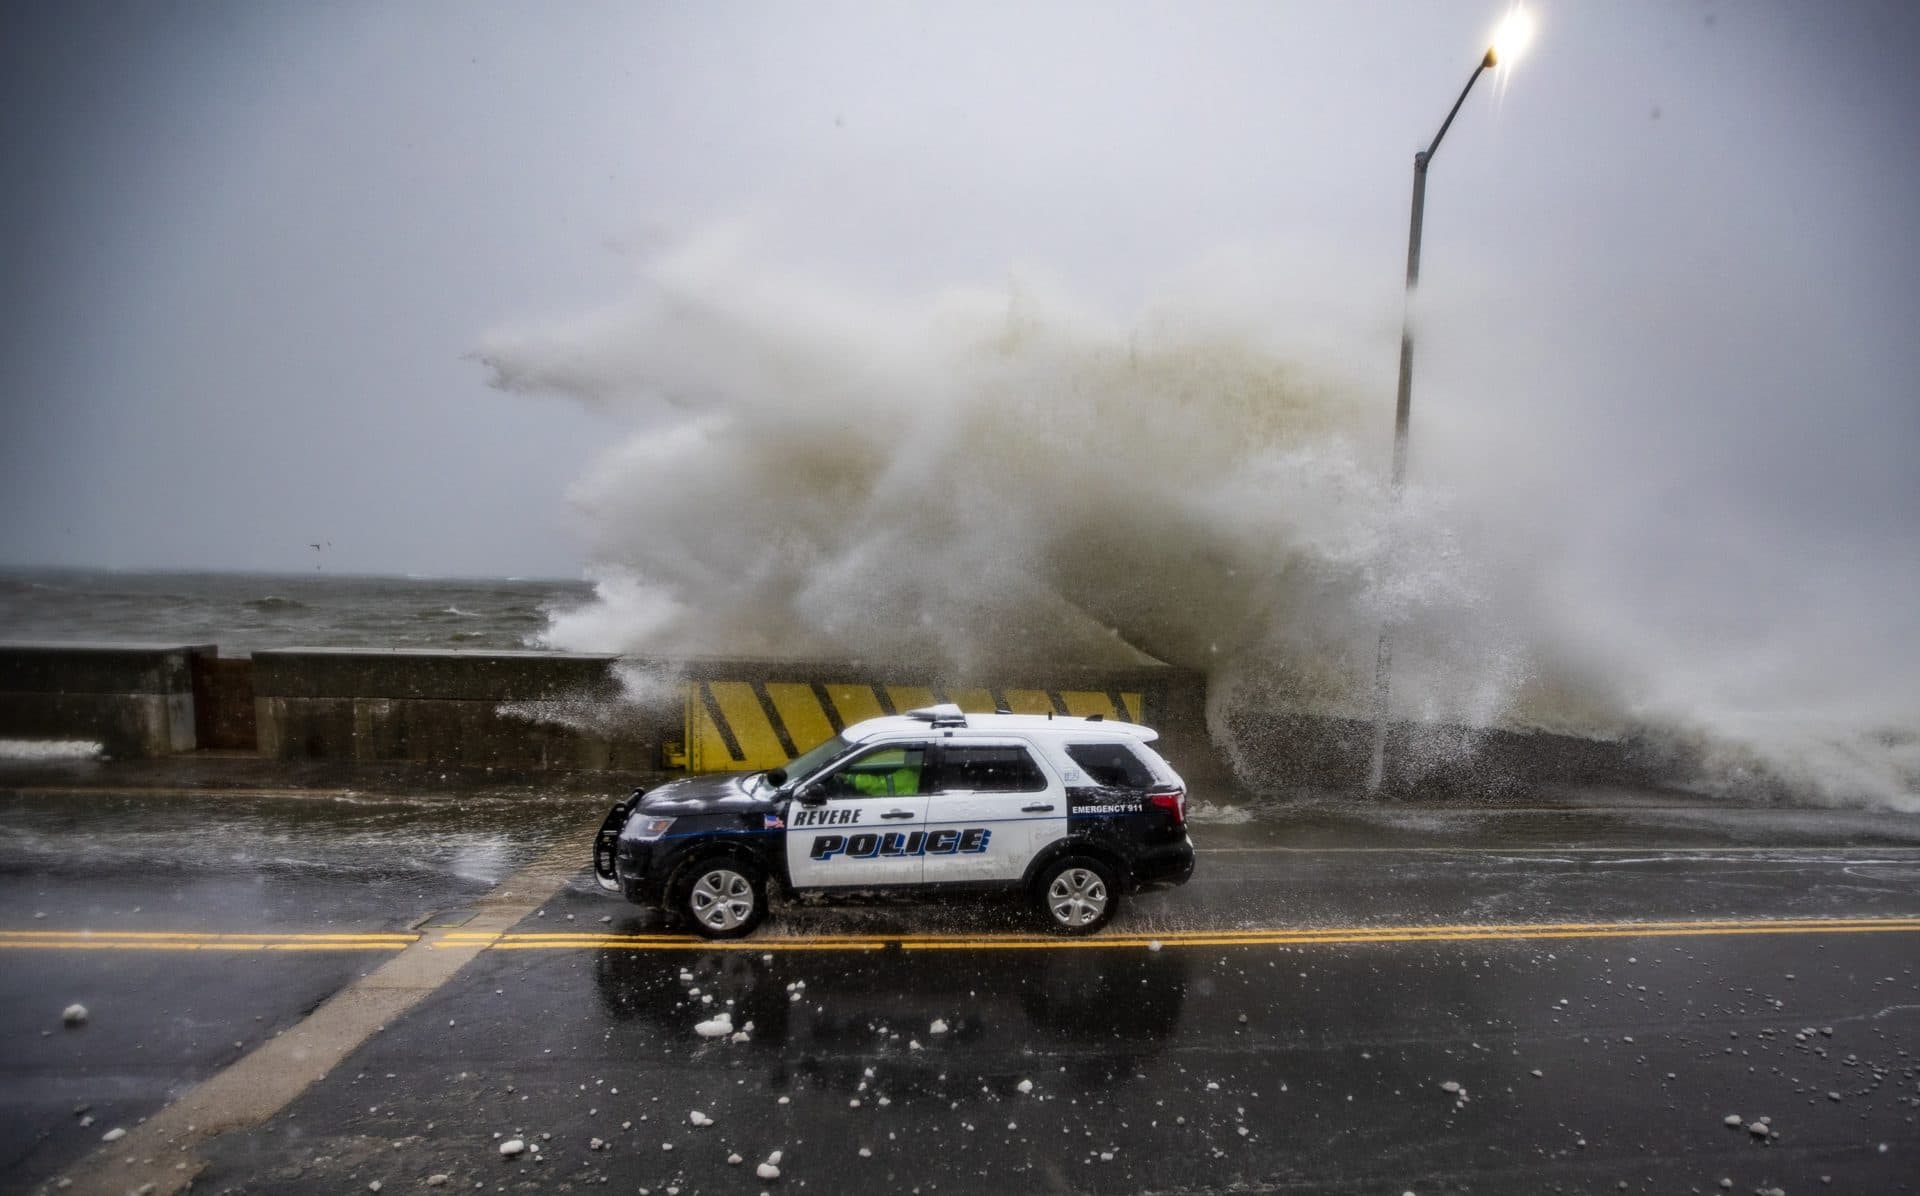 Waves crash along the seawall in Revere at high tide during the Nor’easter as a police car passes by. (Jesse Costa/WBUR)